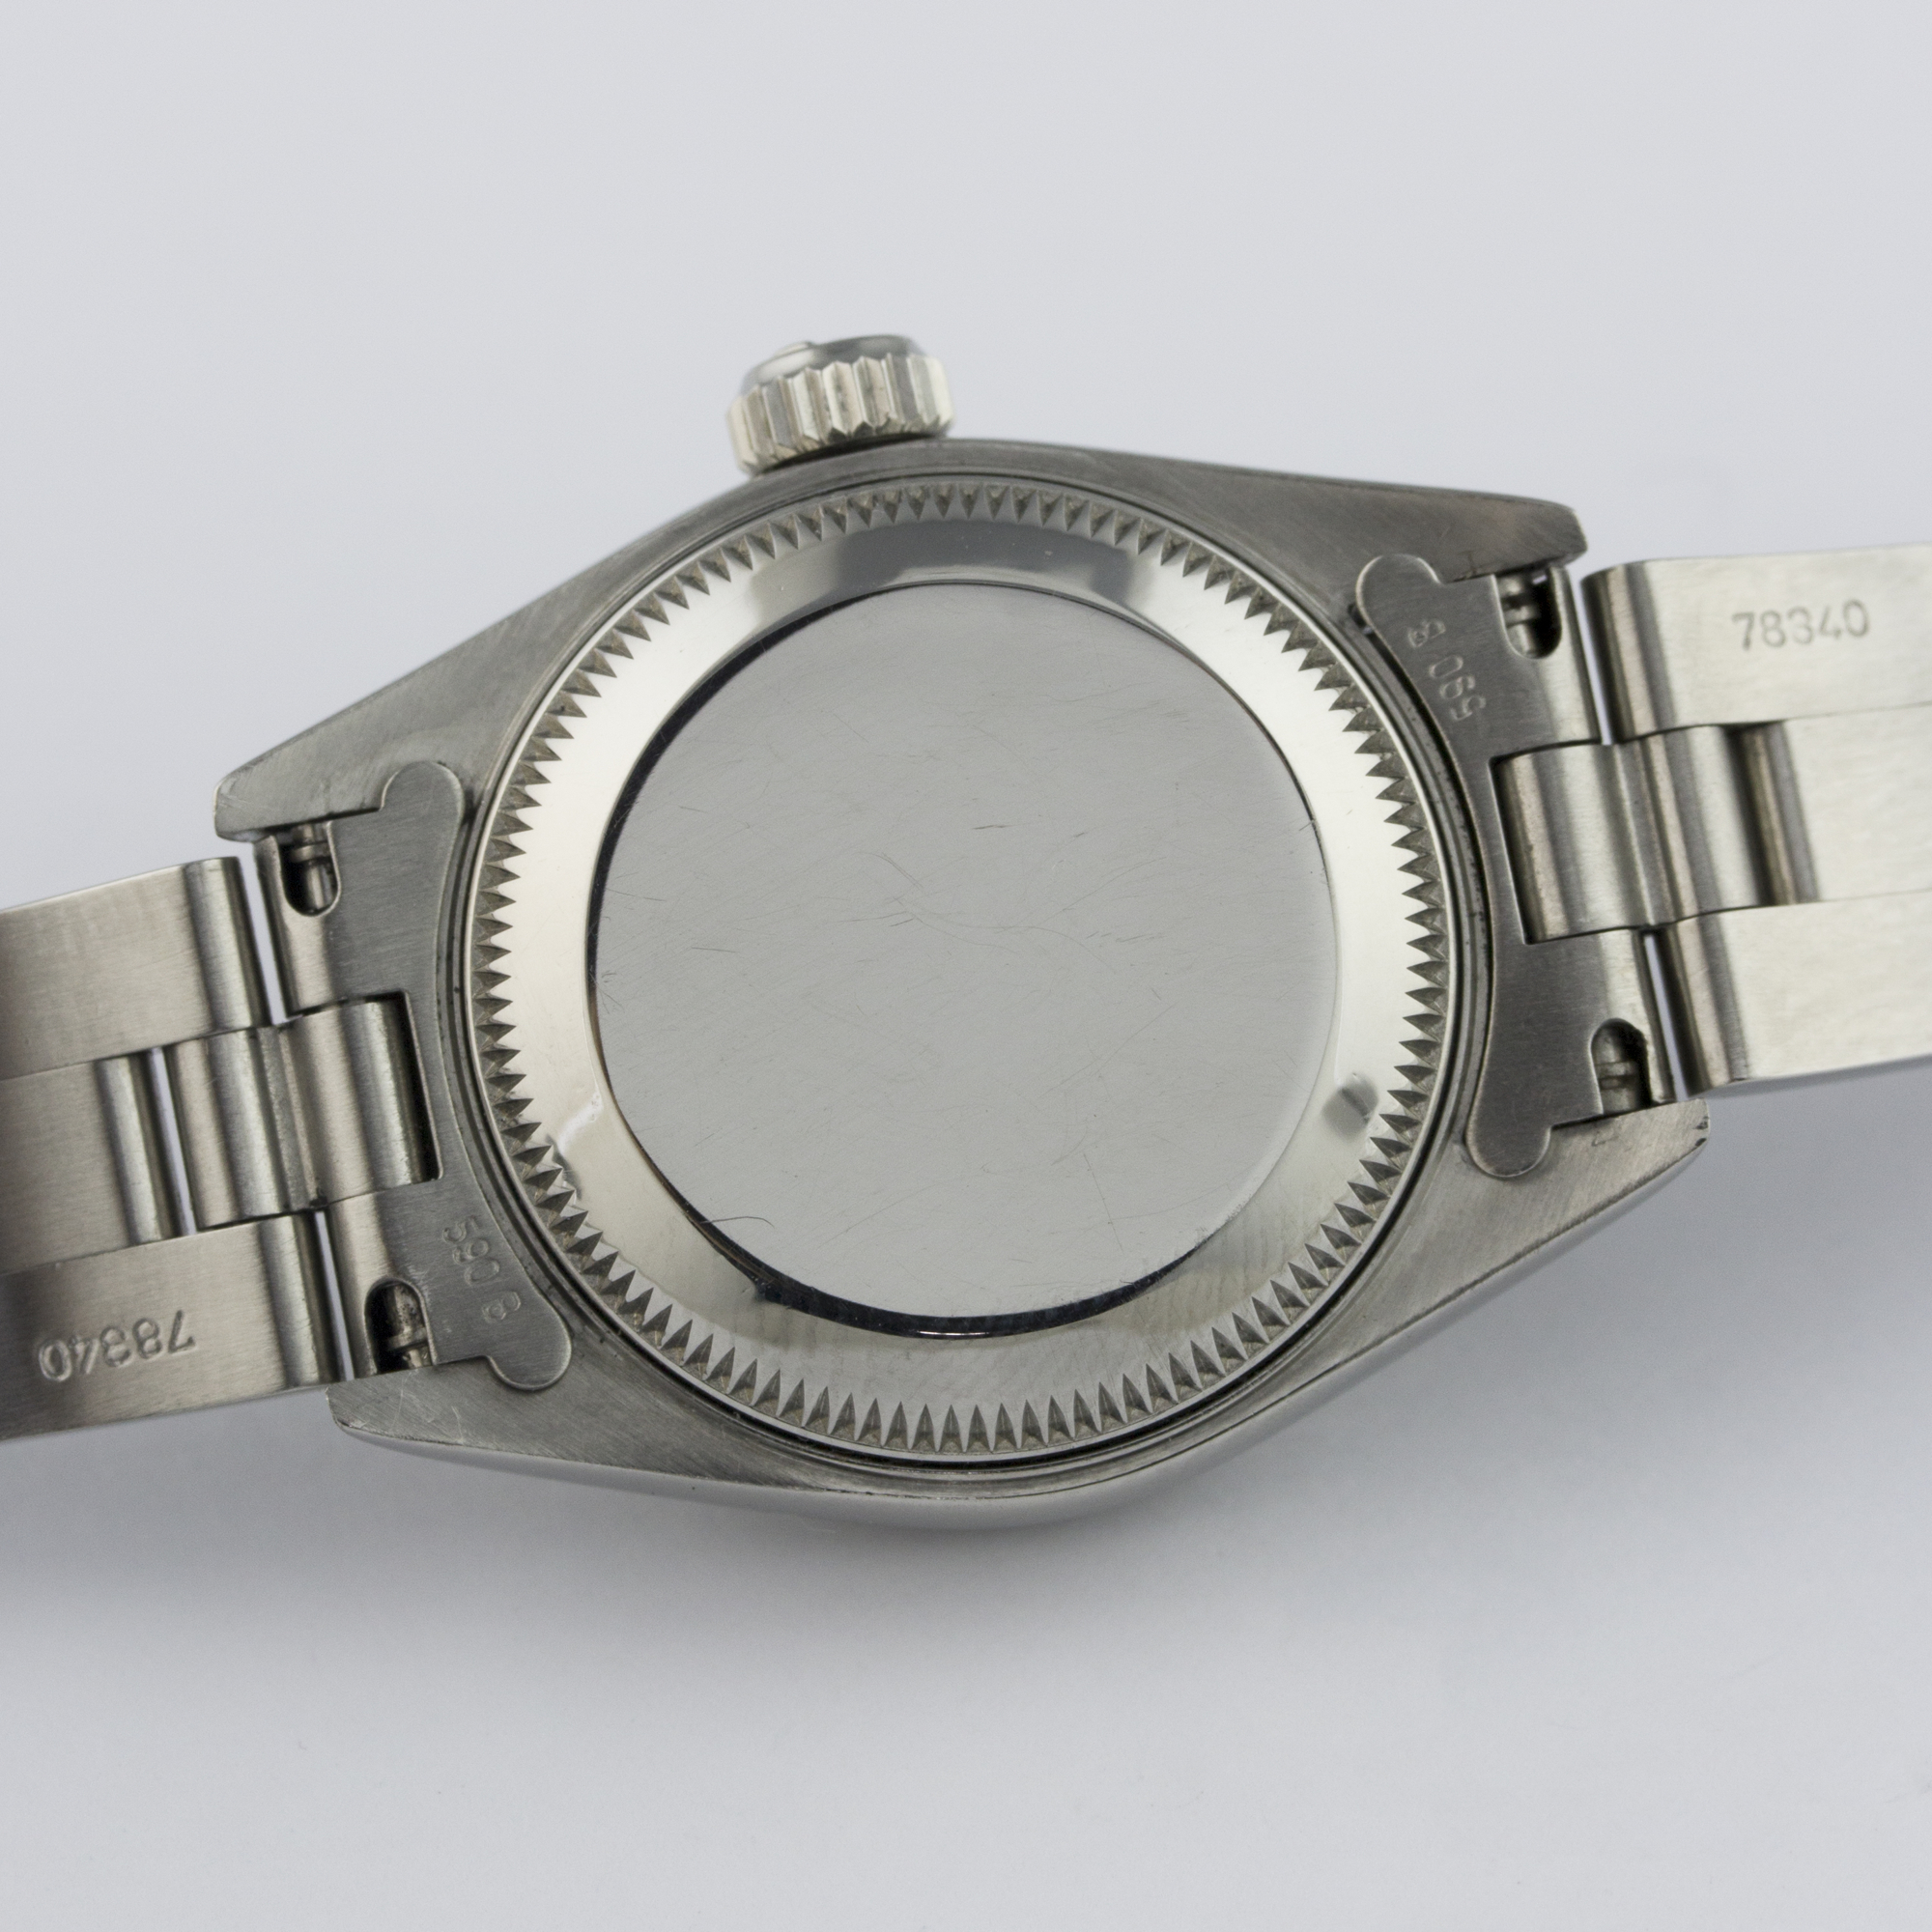 A LADIES STAINLESS STEEL ROLEX OYSTER PERPETUAL DATE BRACELET WATCH CIRCA 1993, REF. 69160 D: Silver - Image 7 of 9